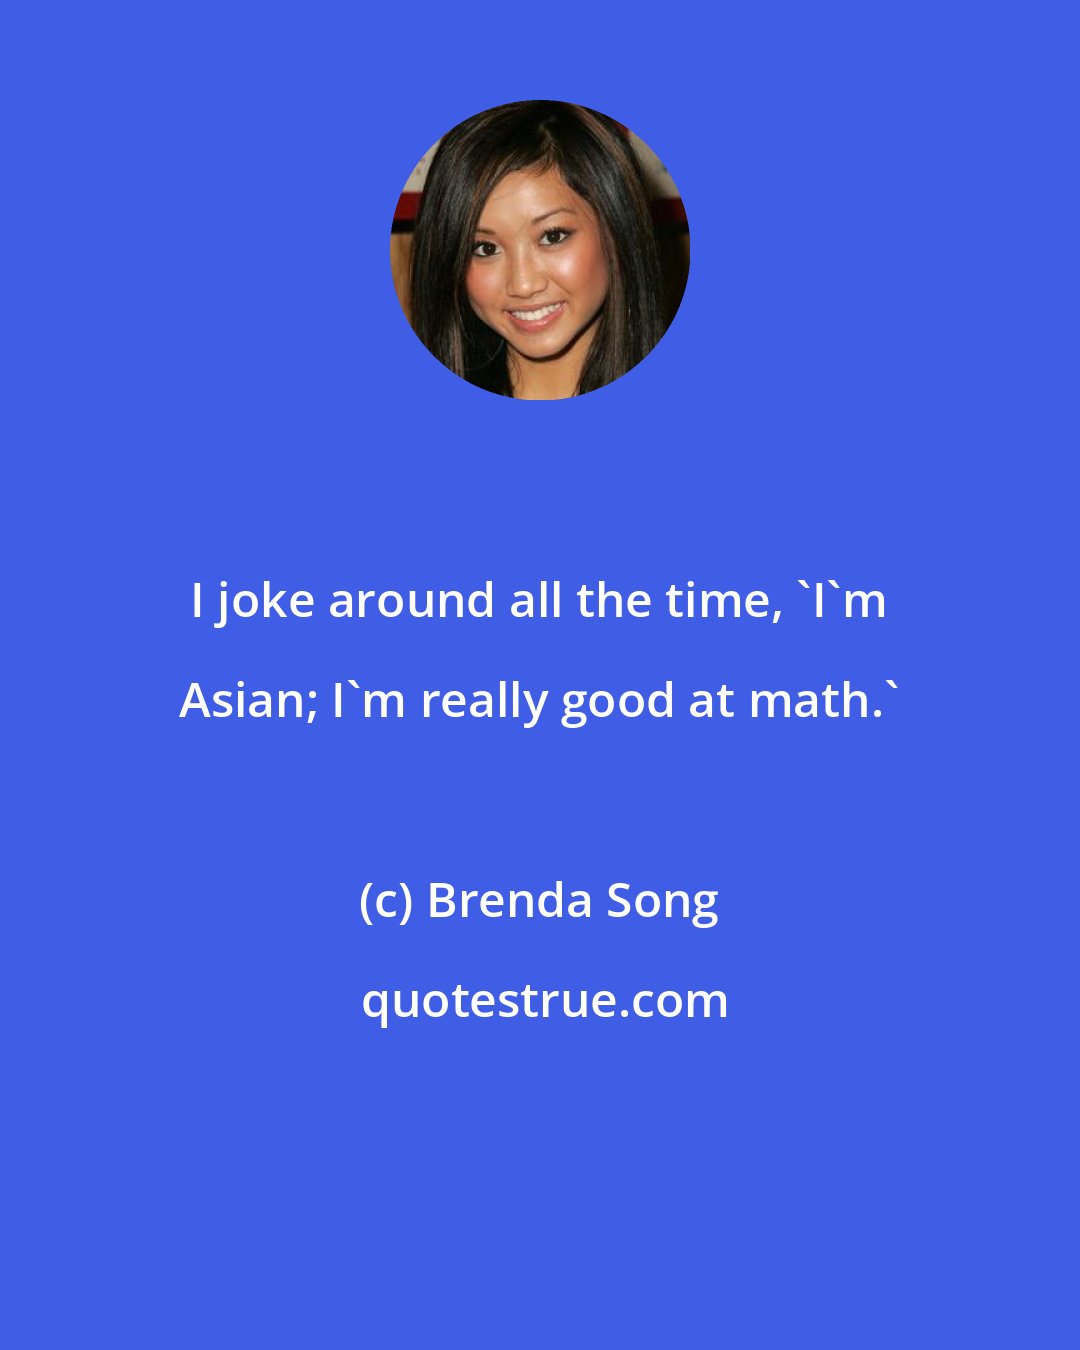 Brenda Song: I joke around all the time, 'I'm Asian; I'm really good at math.'